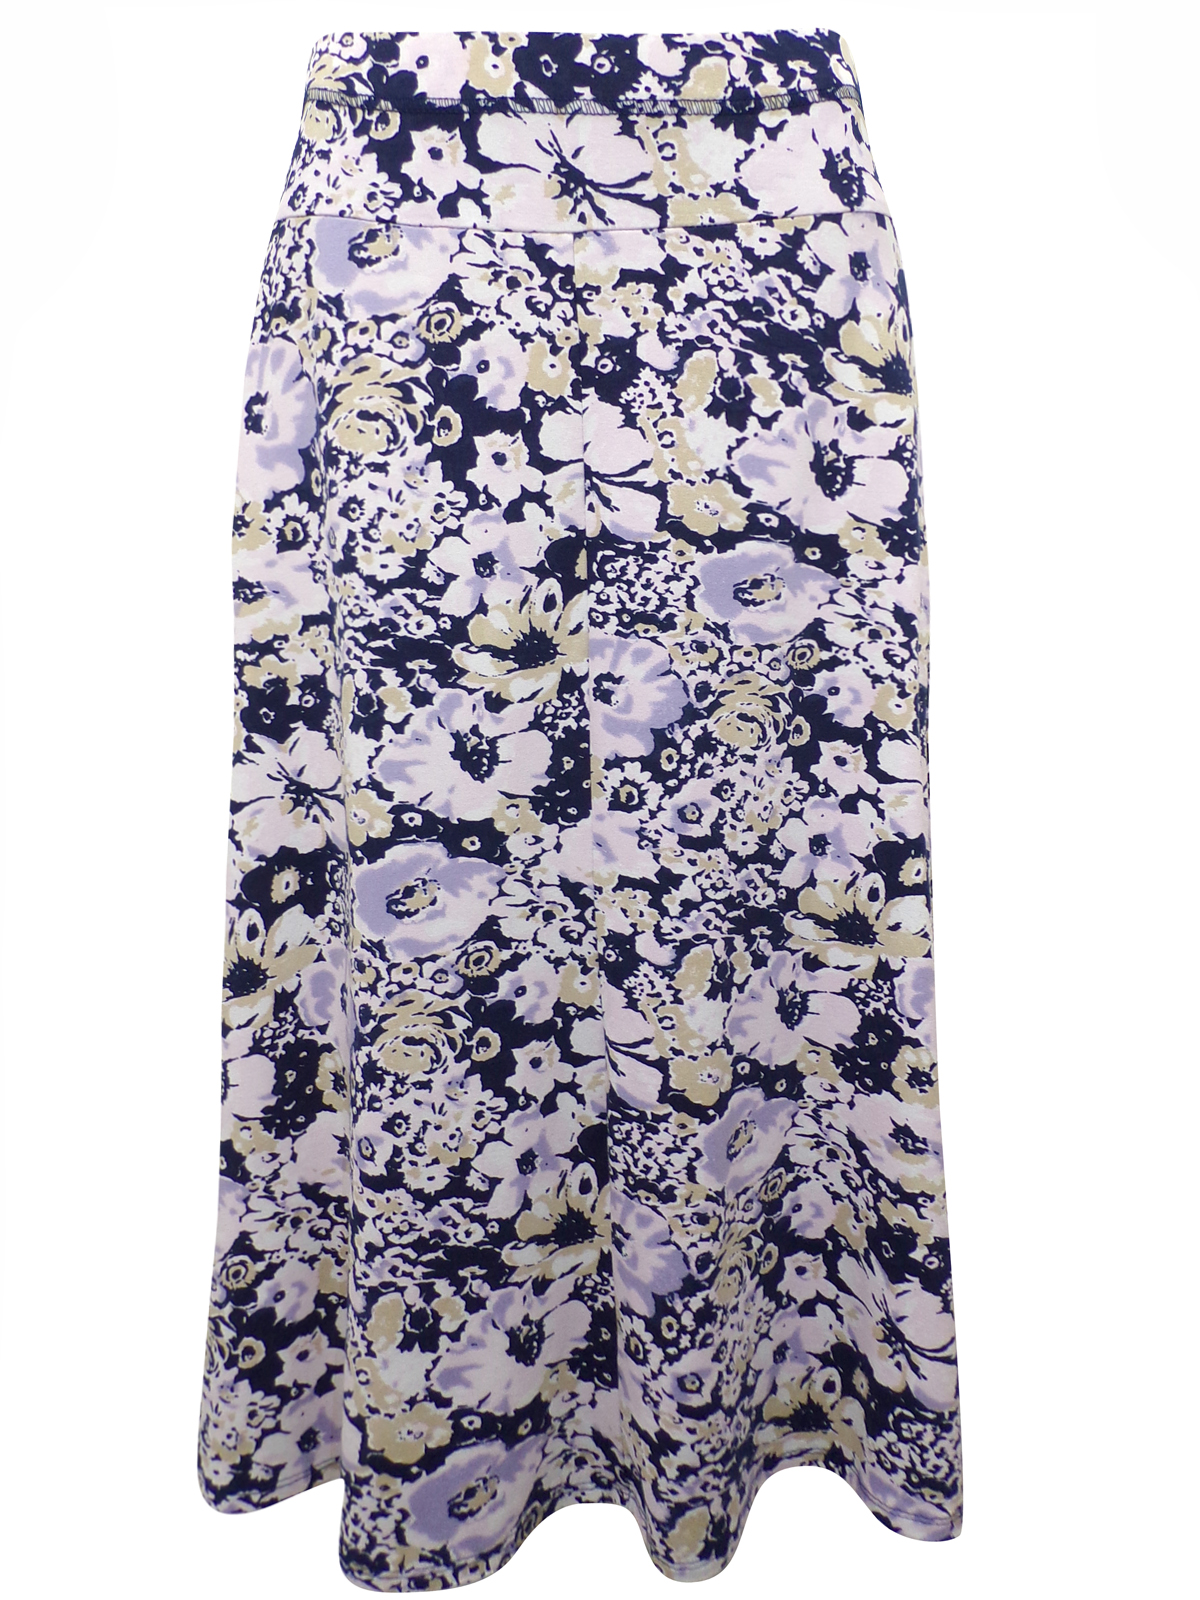 First Avenue NAVY Floral Print Jersey Midi Skirt - Size 10 to 18